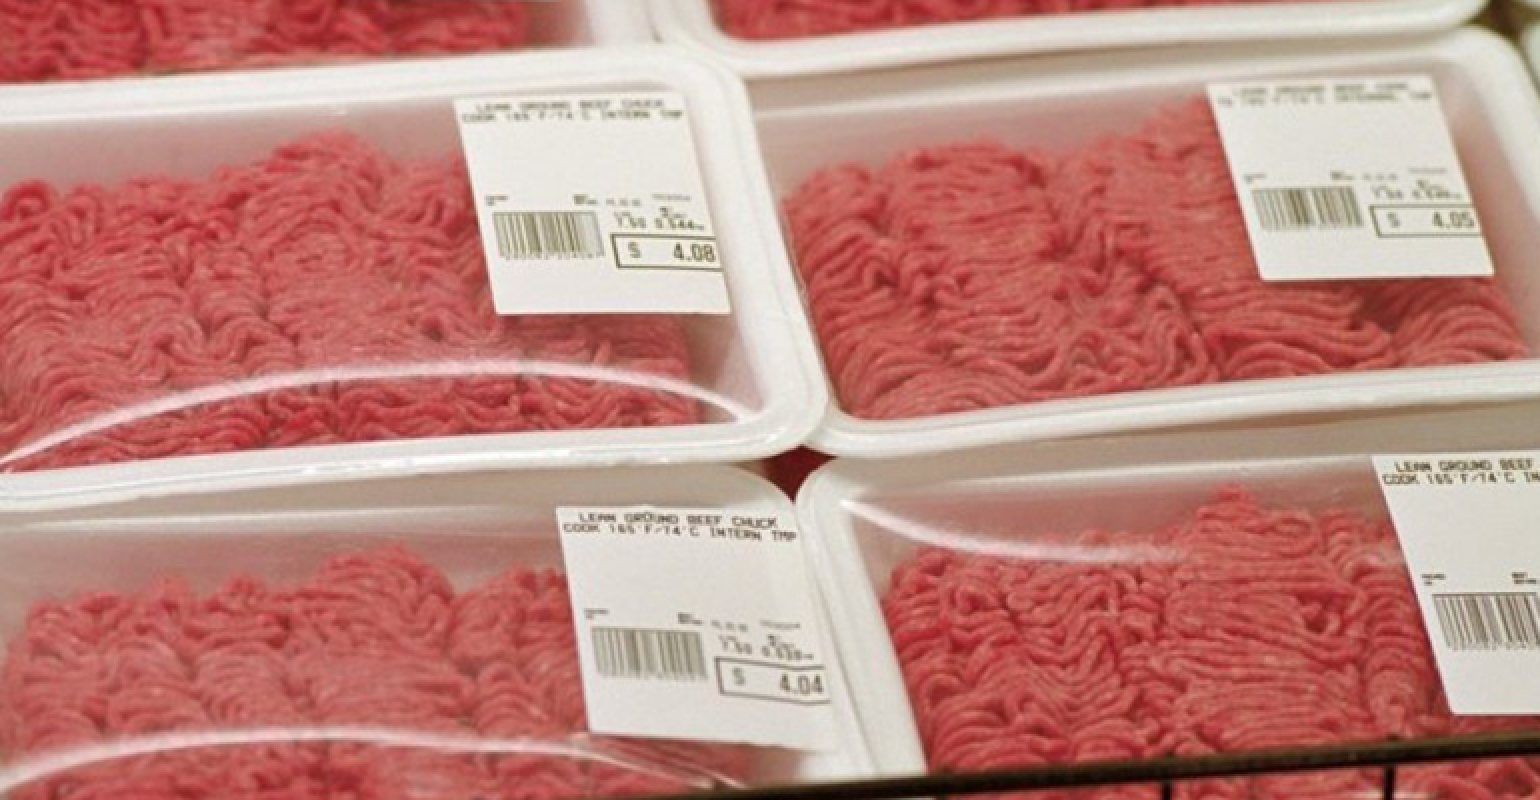 Albertsons, Publix recall ground beef products Supermarket News